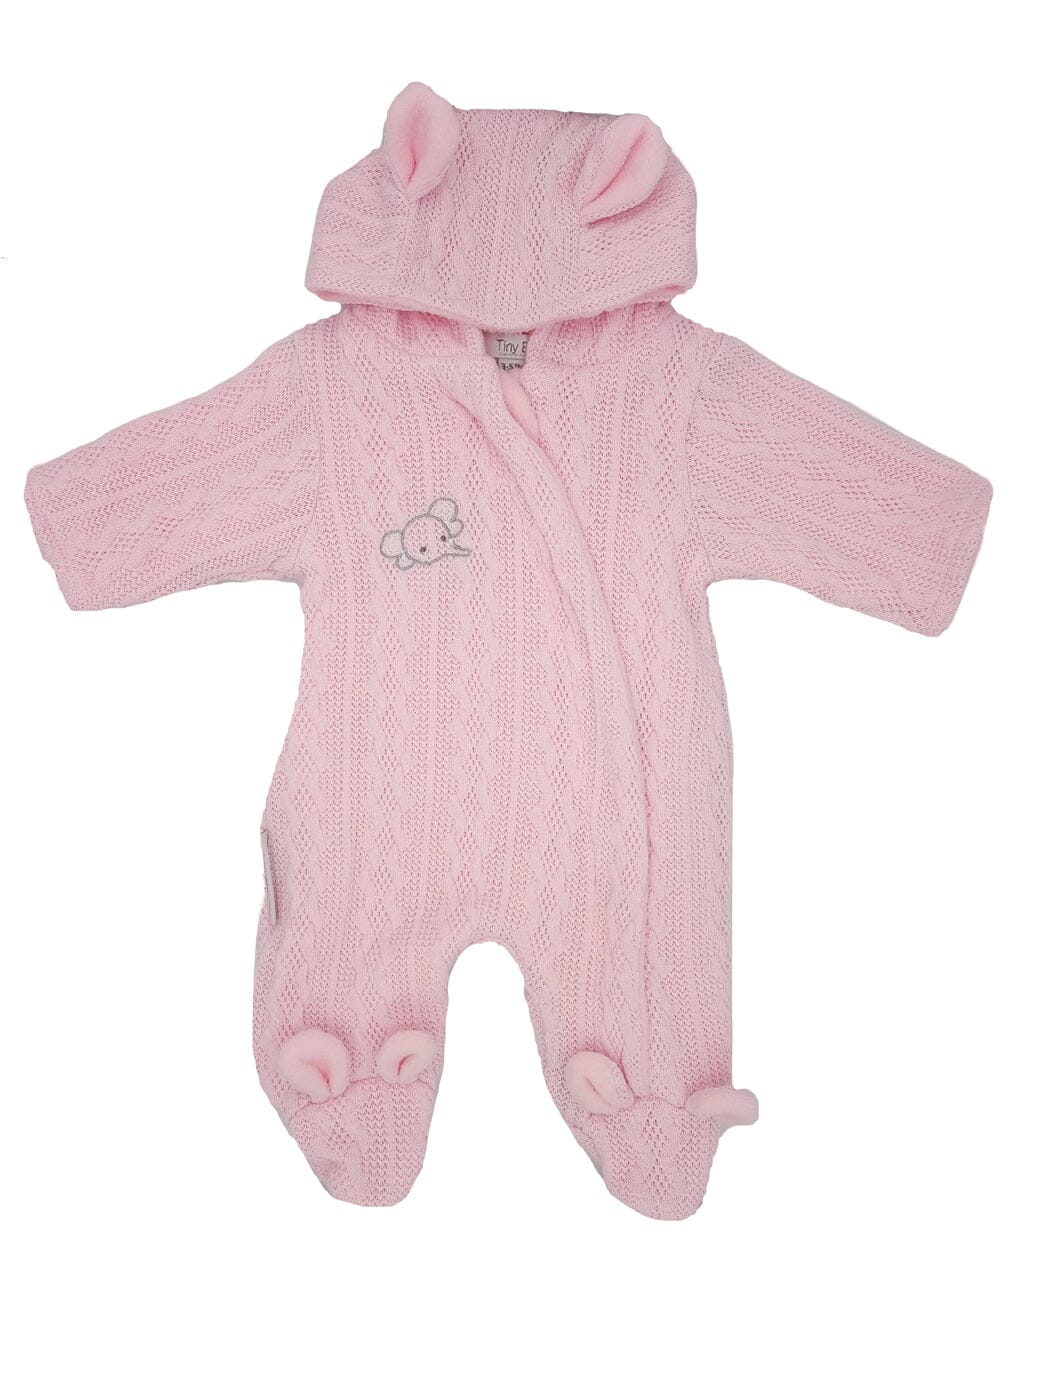 Knitted Tiny Baby Pramsuit With Bunny Ears - Pink Snowsuit / Pramsuit Tiny Baby 